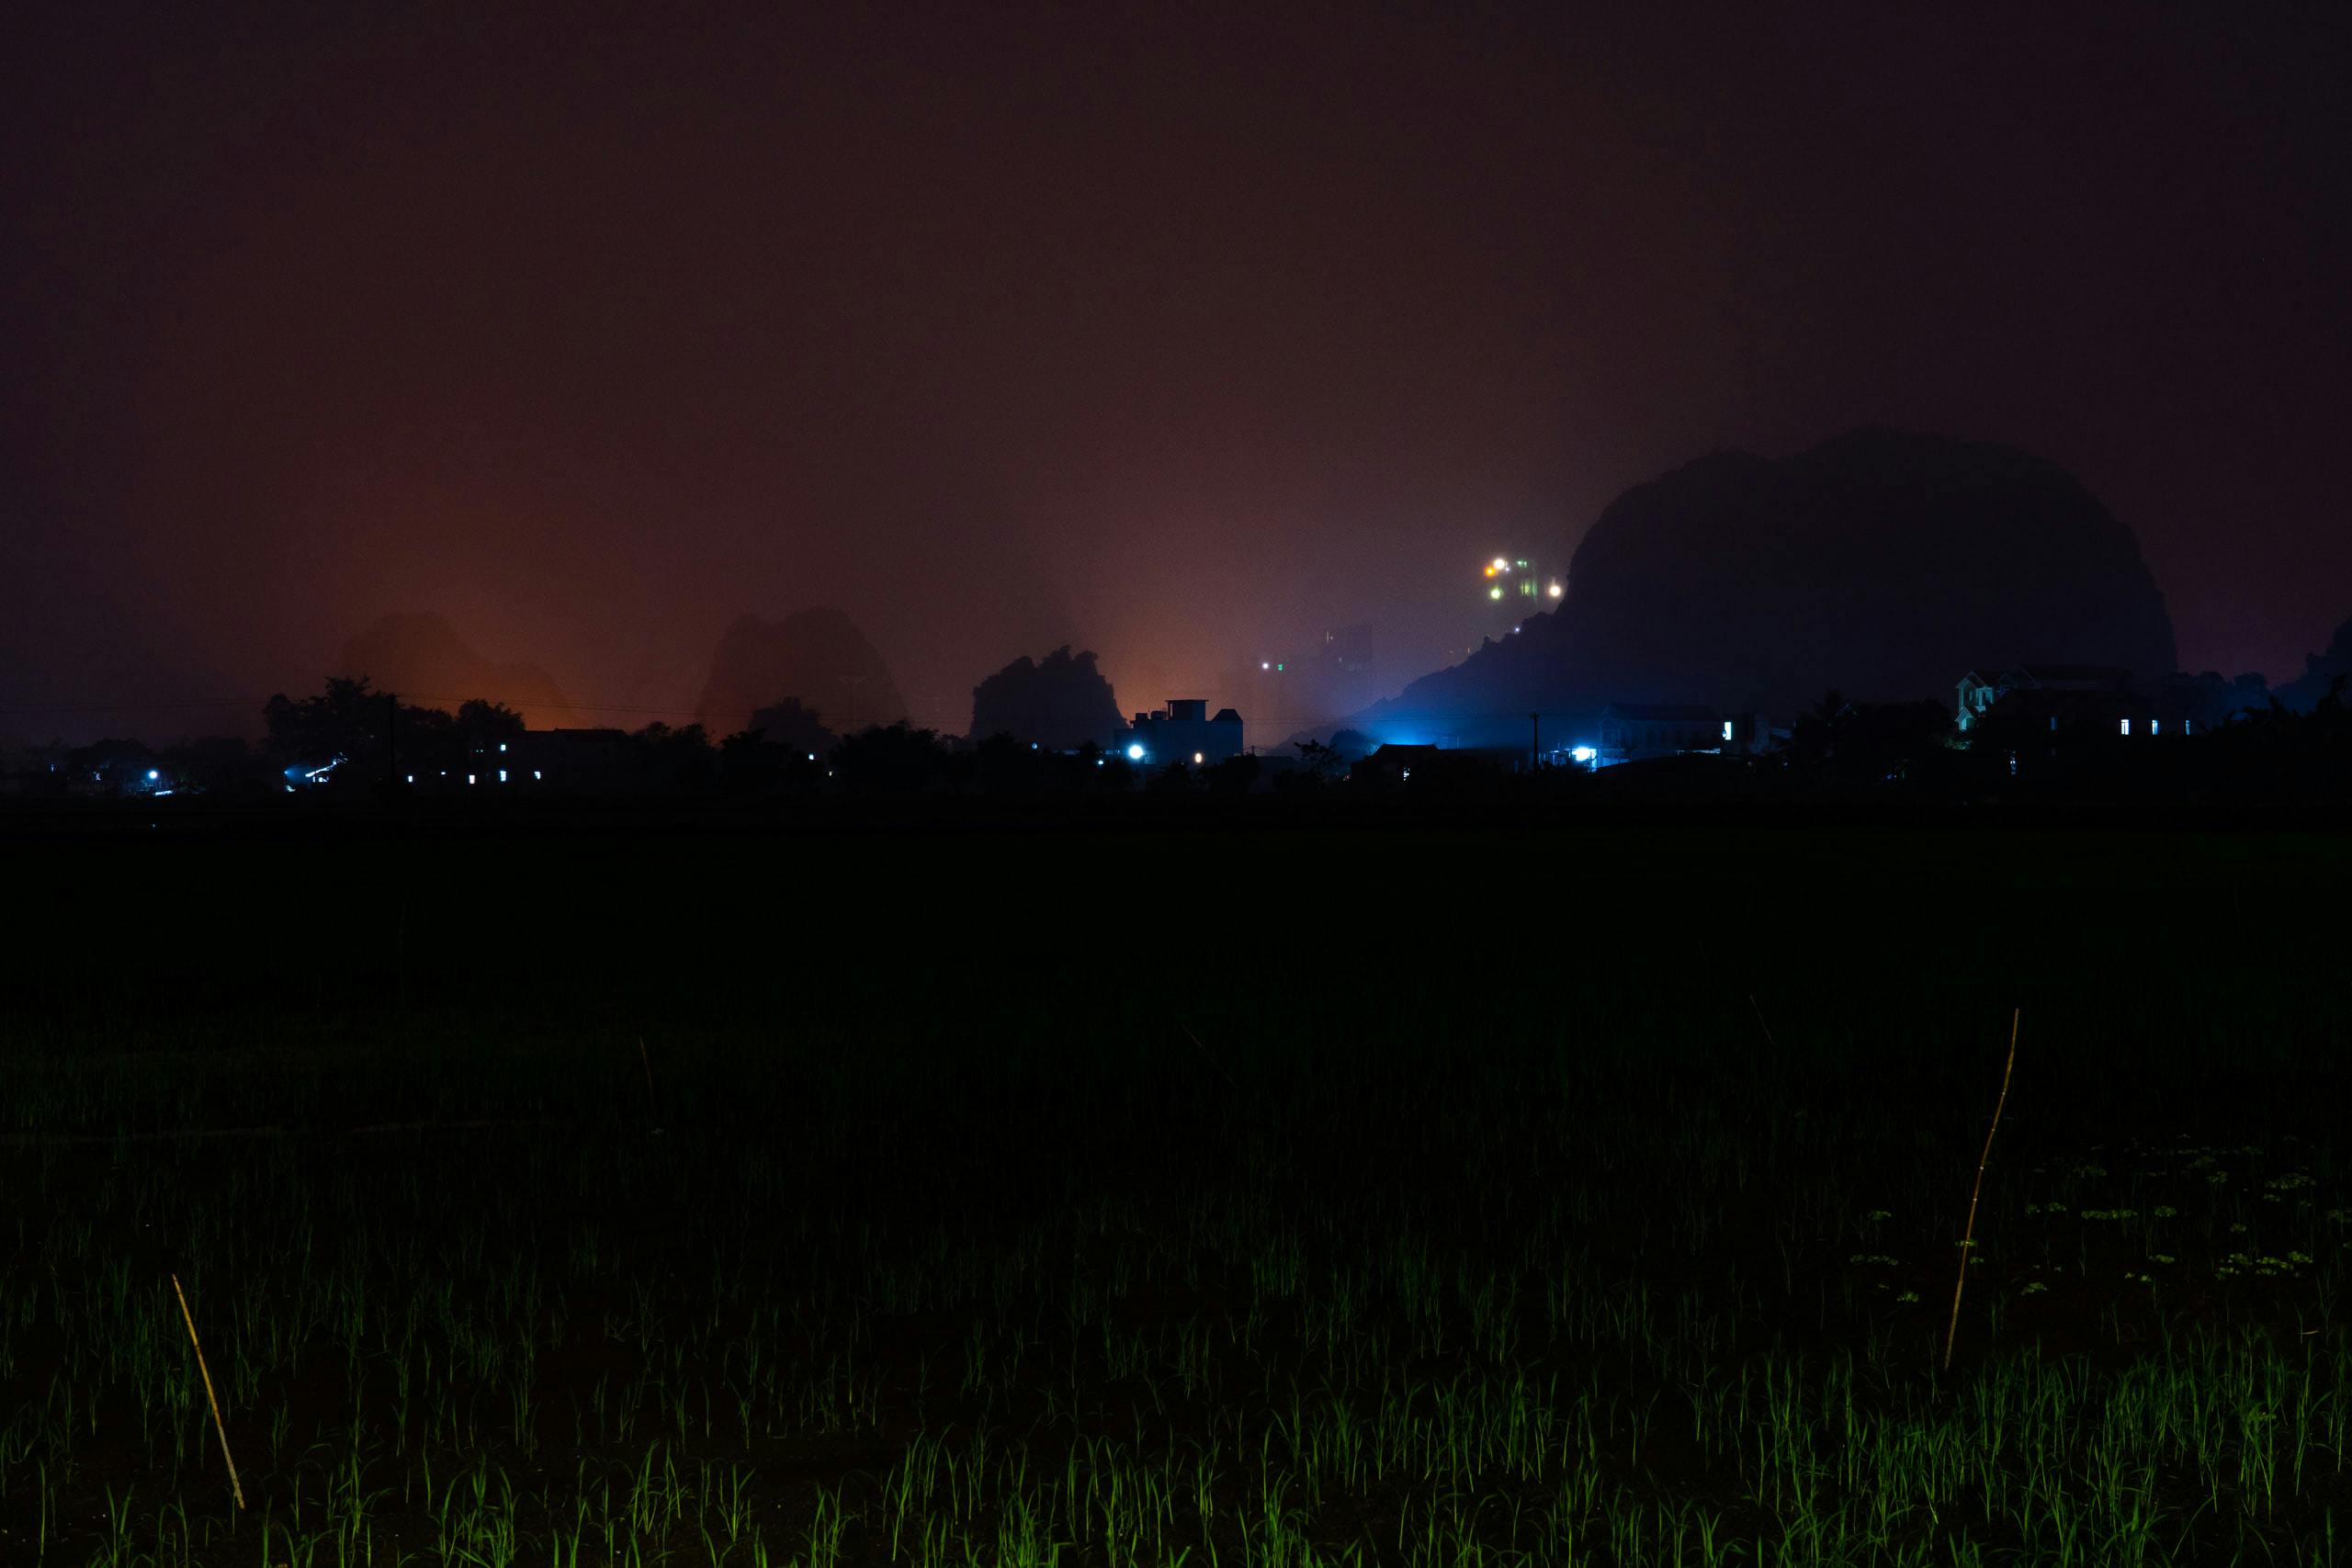 Ricefield at night with lights in fog at a distance